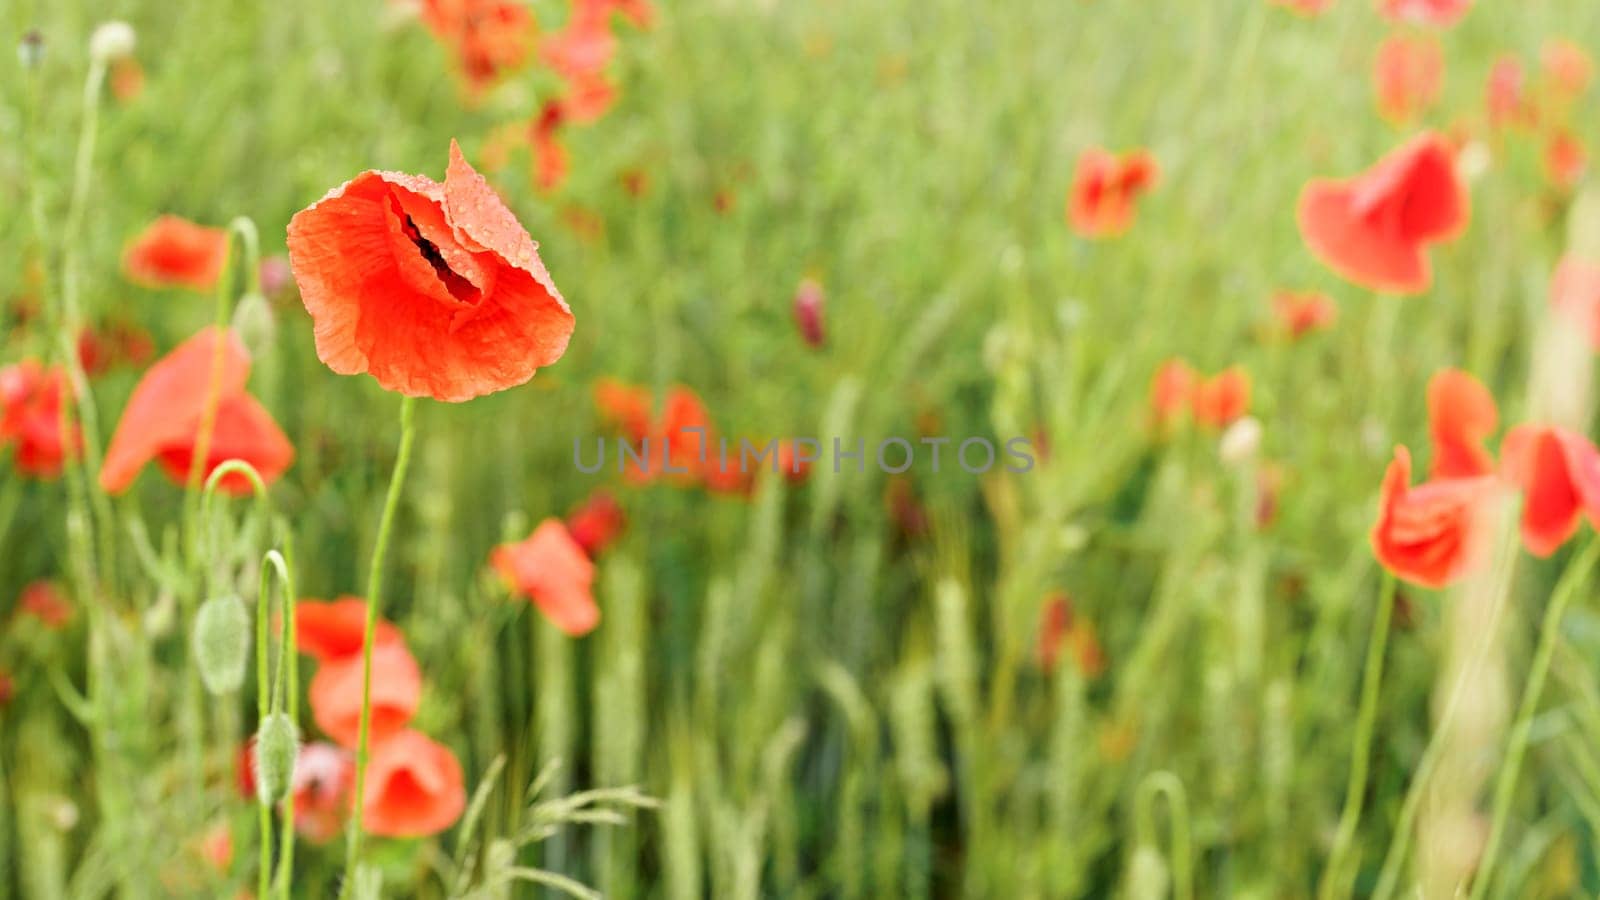 Bright red poppies, drops of rain on flower petals, growing in field of green unripe wheat